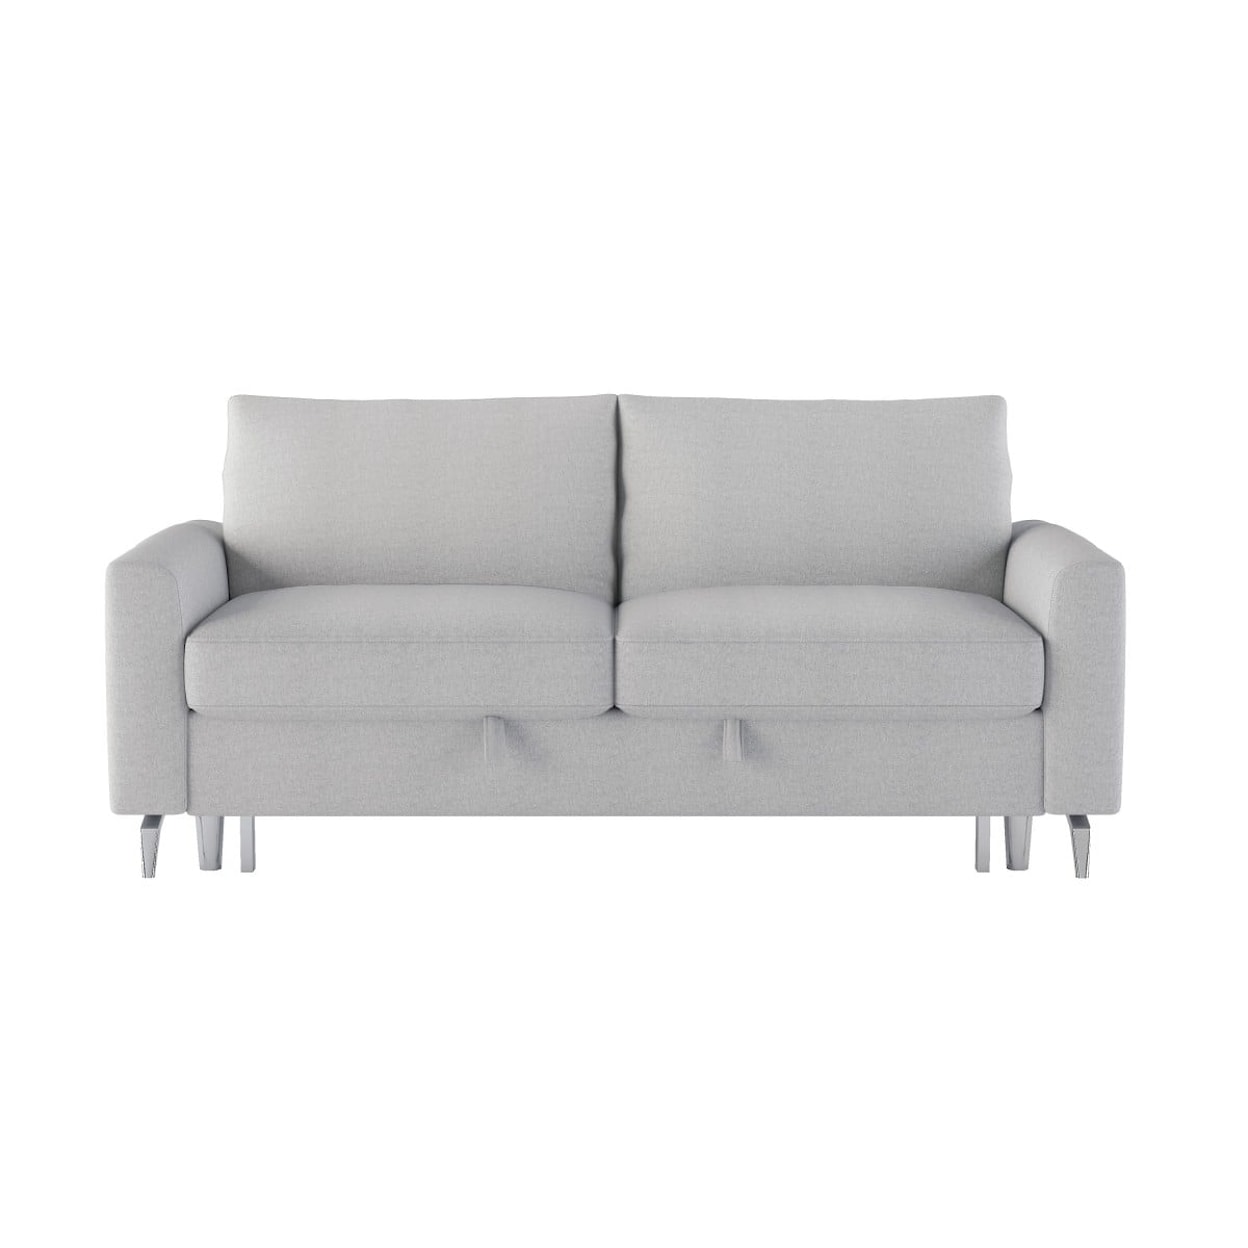 Homelegance Furniture Price Convertible Studio Sofa with Pull-out Bed